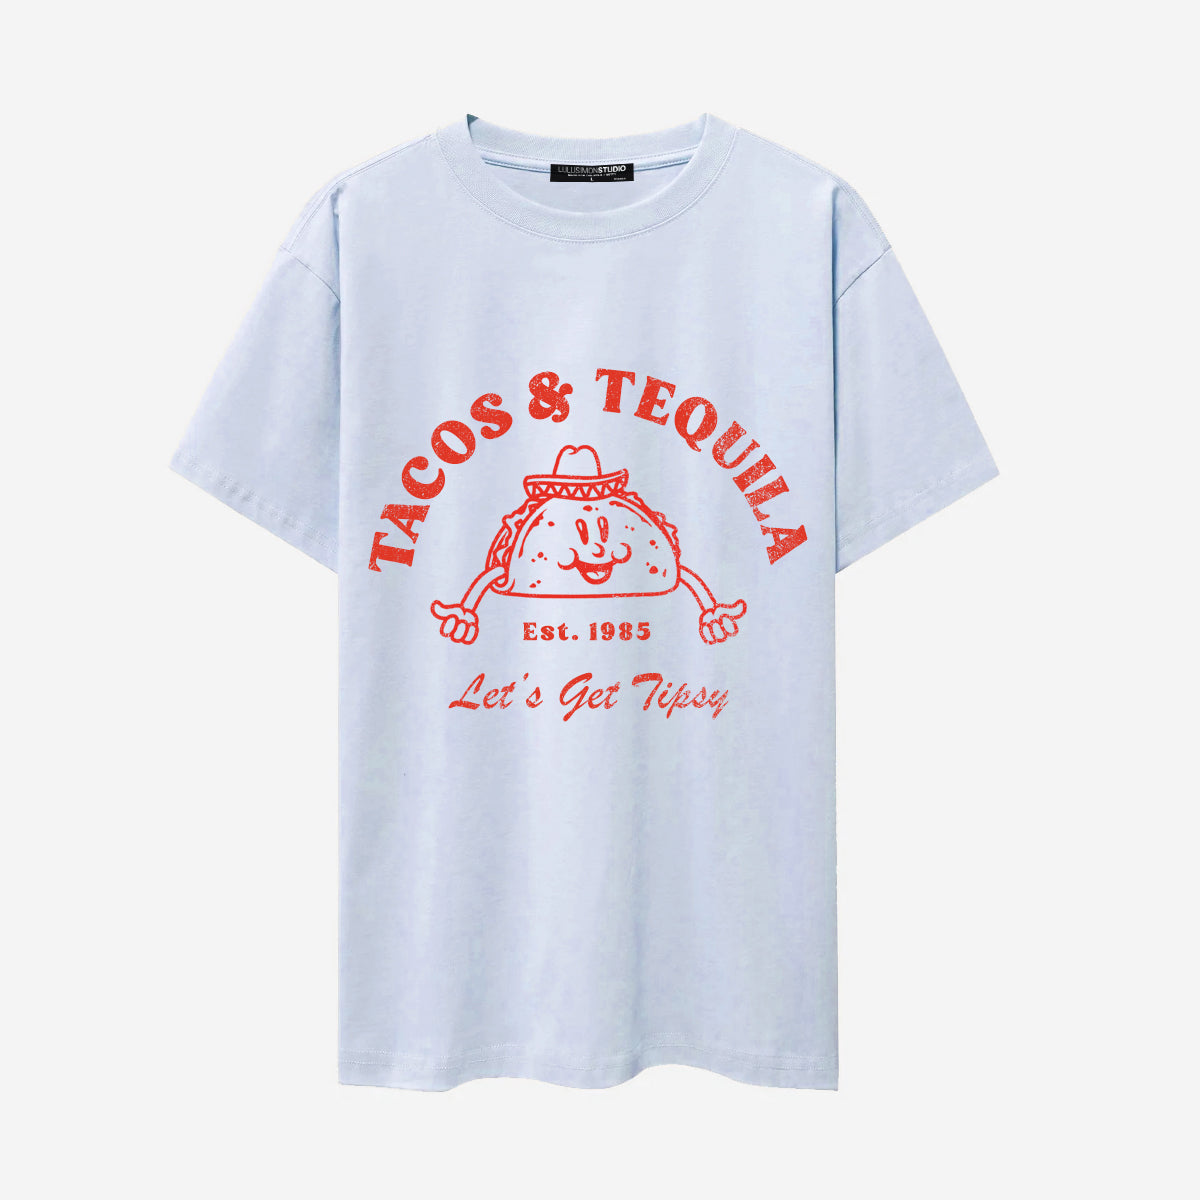 Tacos & Tequila Heavyweight Cotton Tee